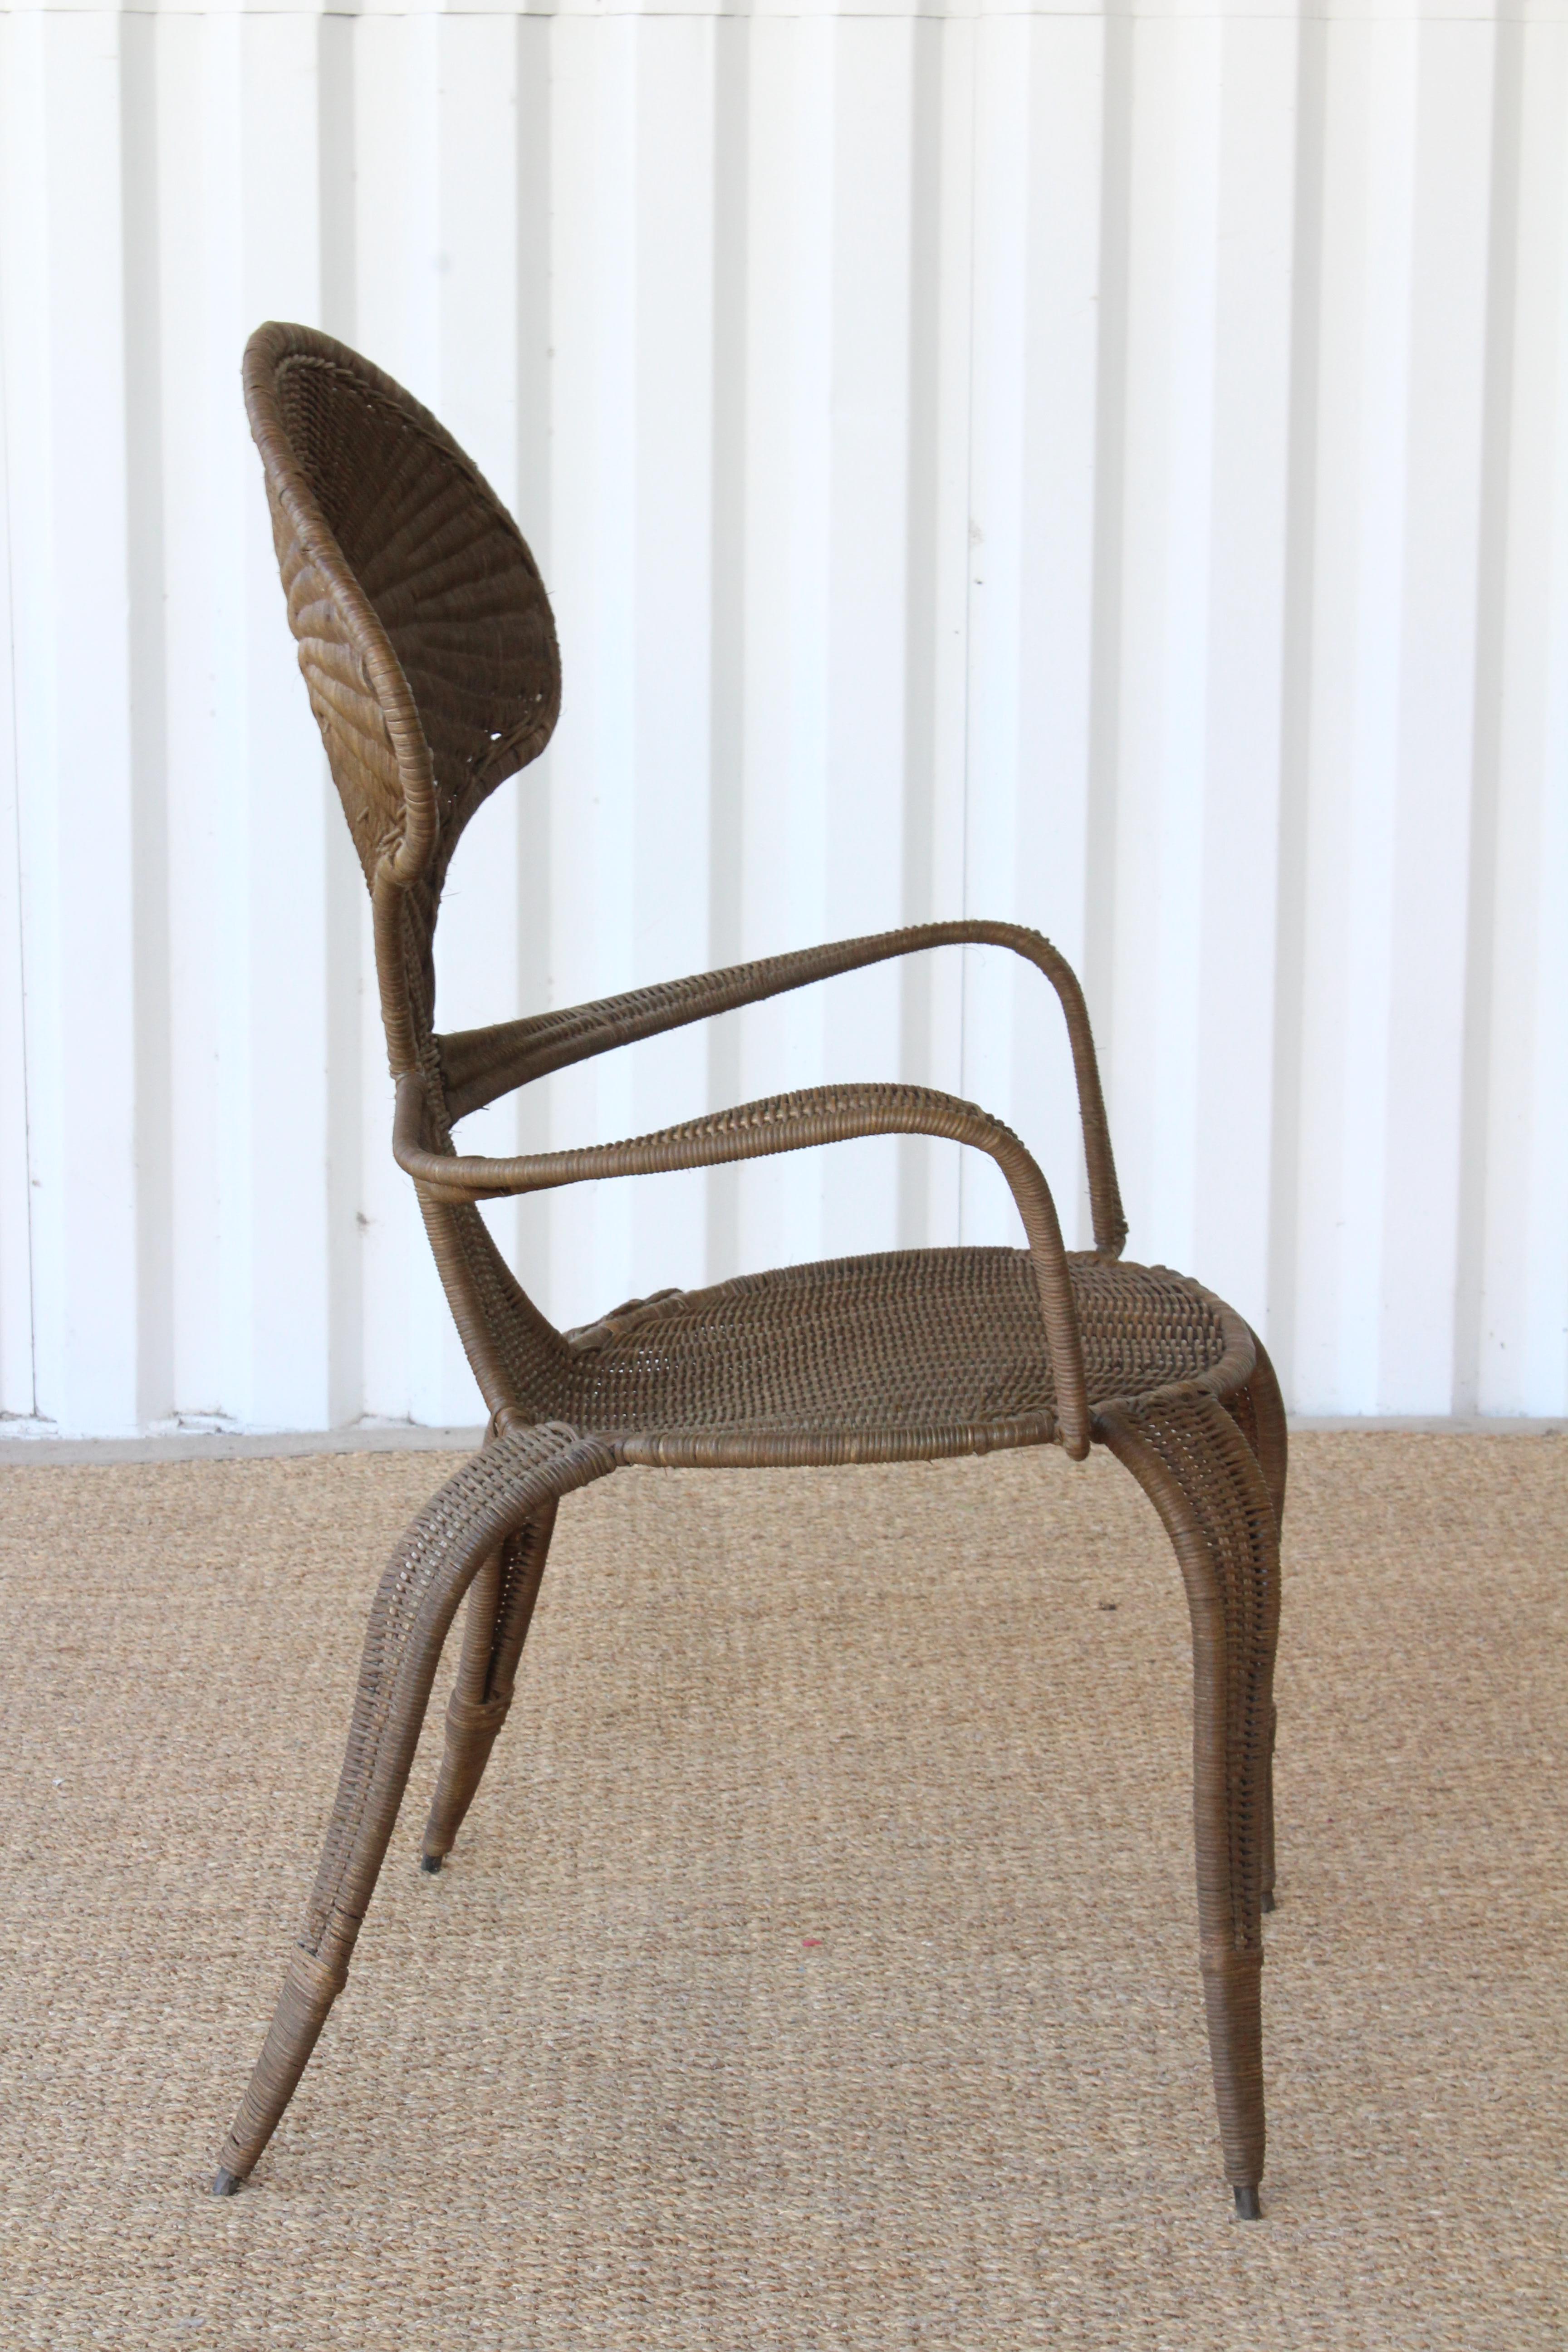 American Wicker and Iron Armchair by Danny Ho Fong, 1960s.